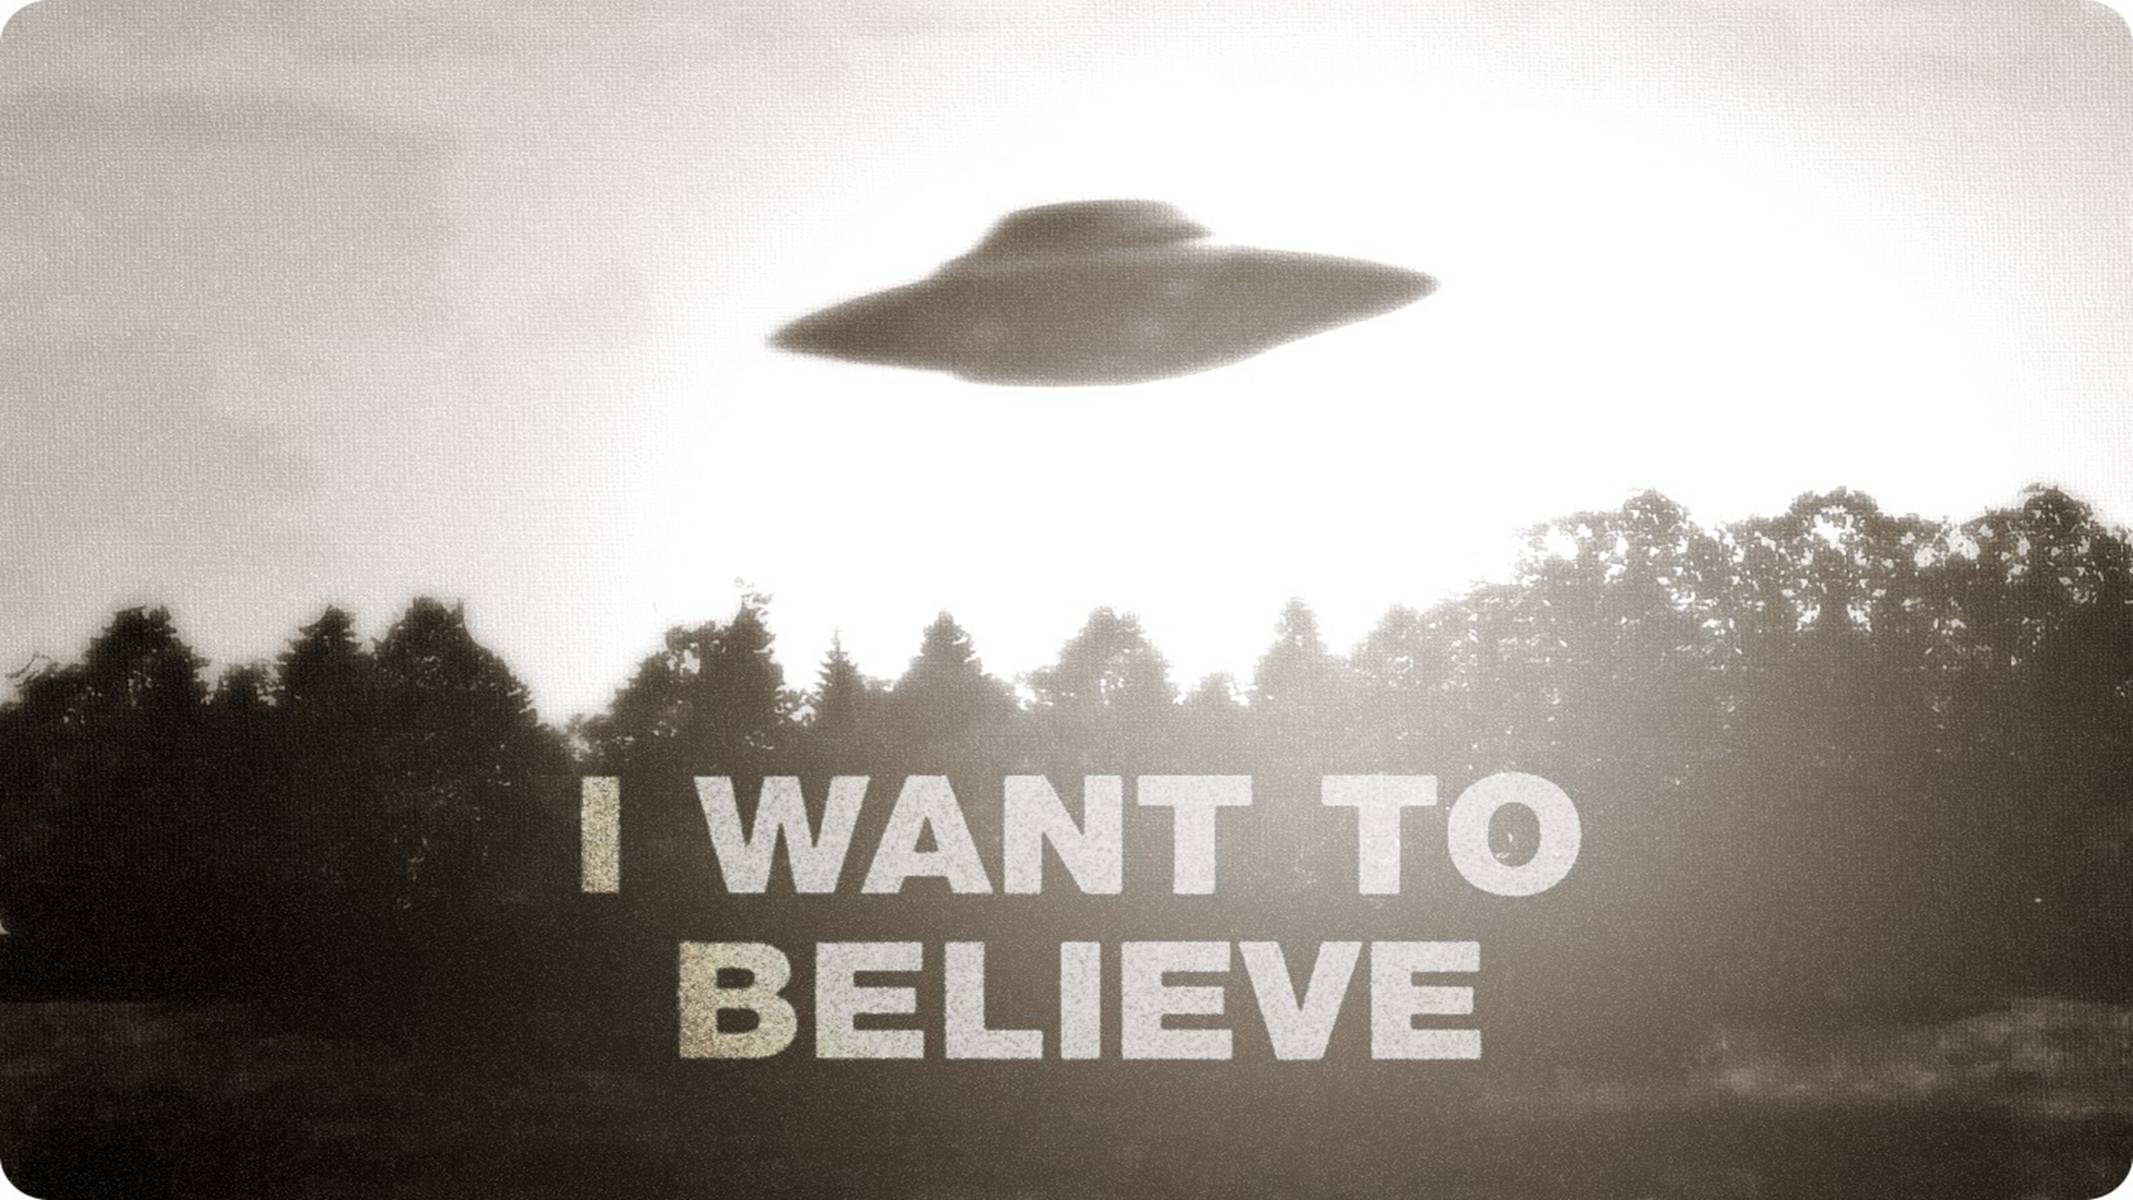 I want to sing. Постер i want to believe. Плакат секретные материалы i want to believe. НЛО. Плакат с НЛО I want to believe.